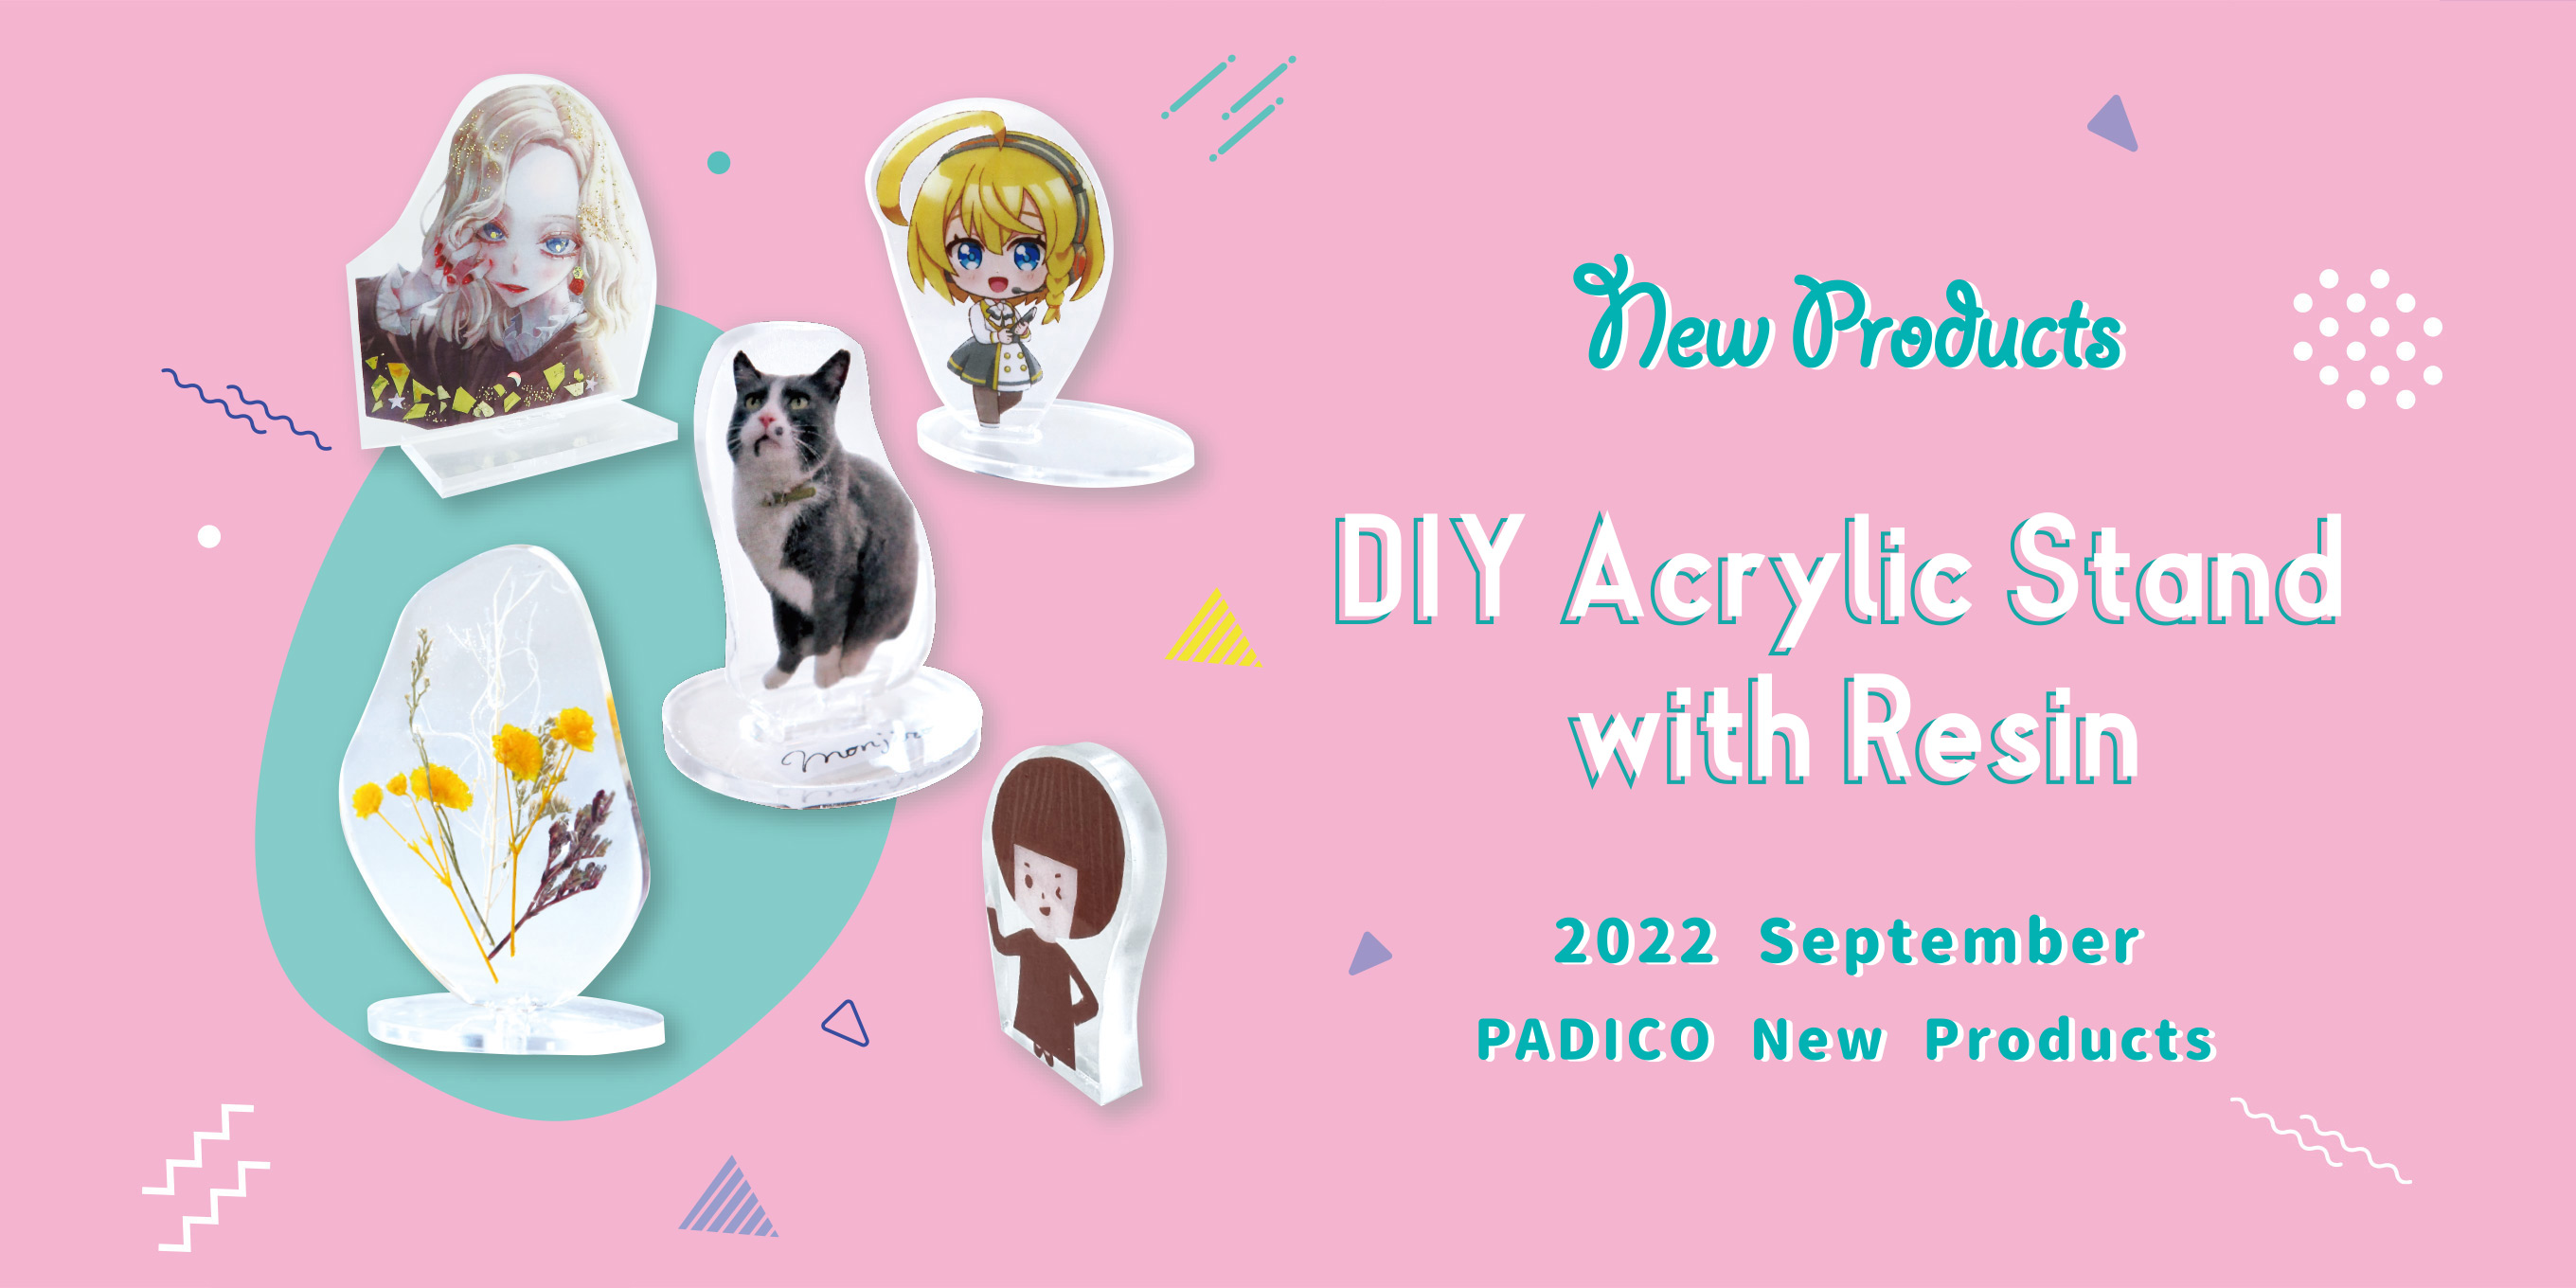 New Products　DIY Acrylic Stand with Resin　2022 September PADICO New Products